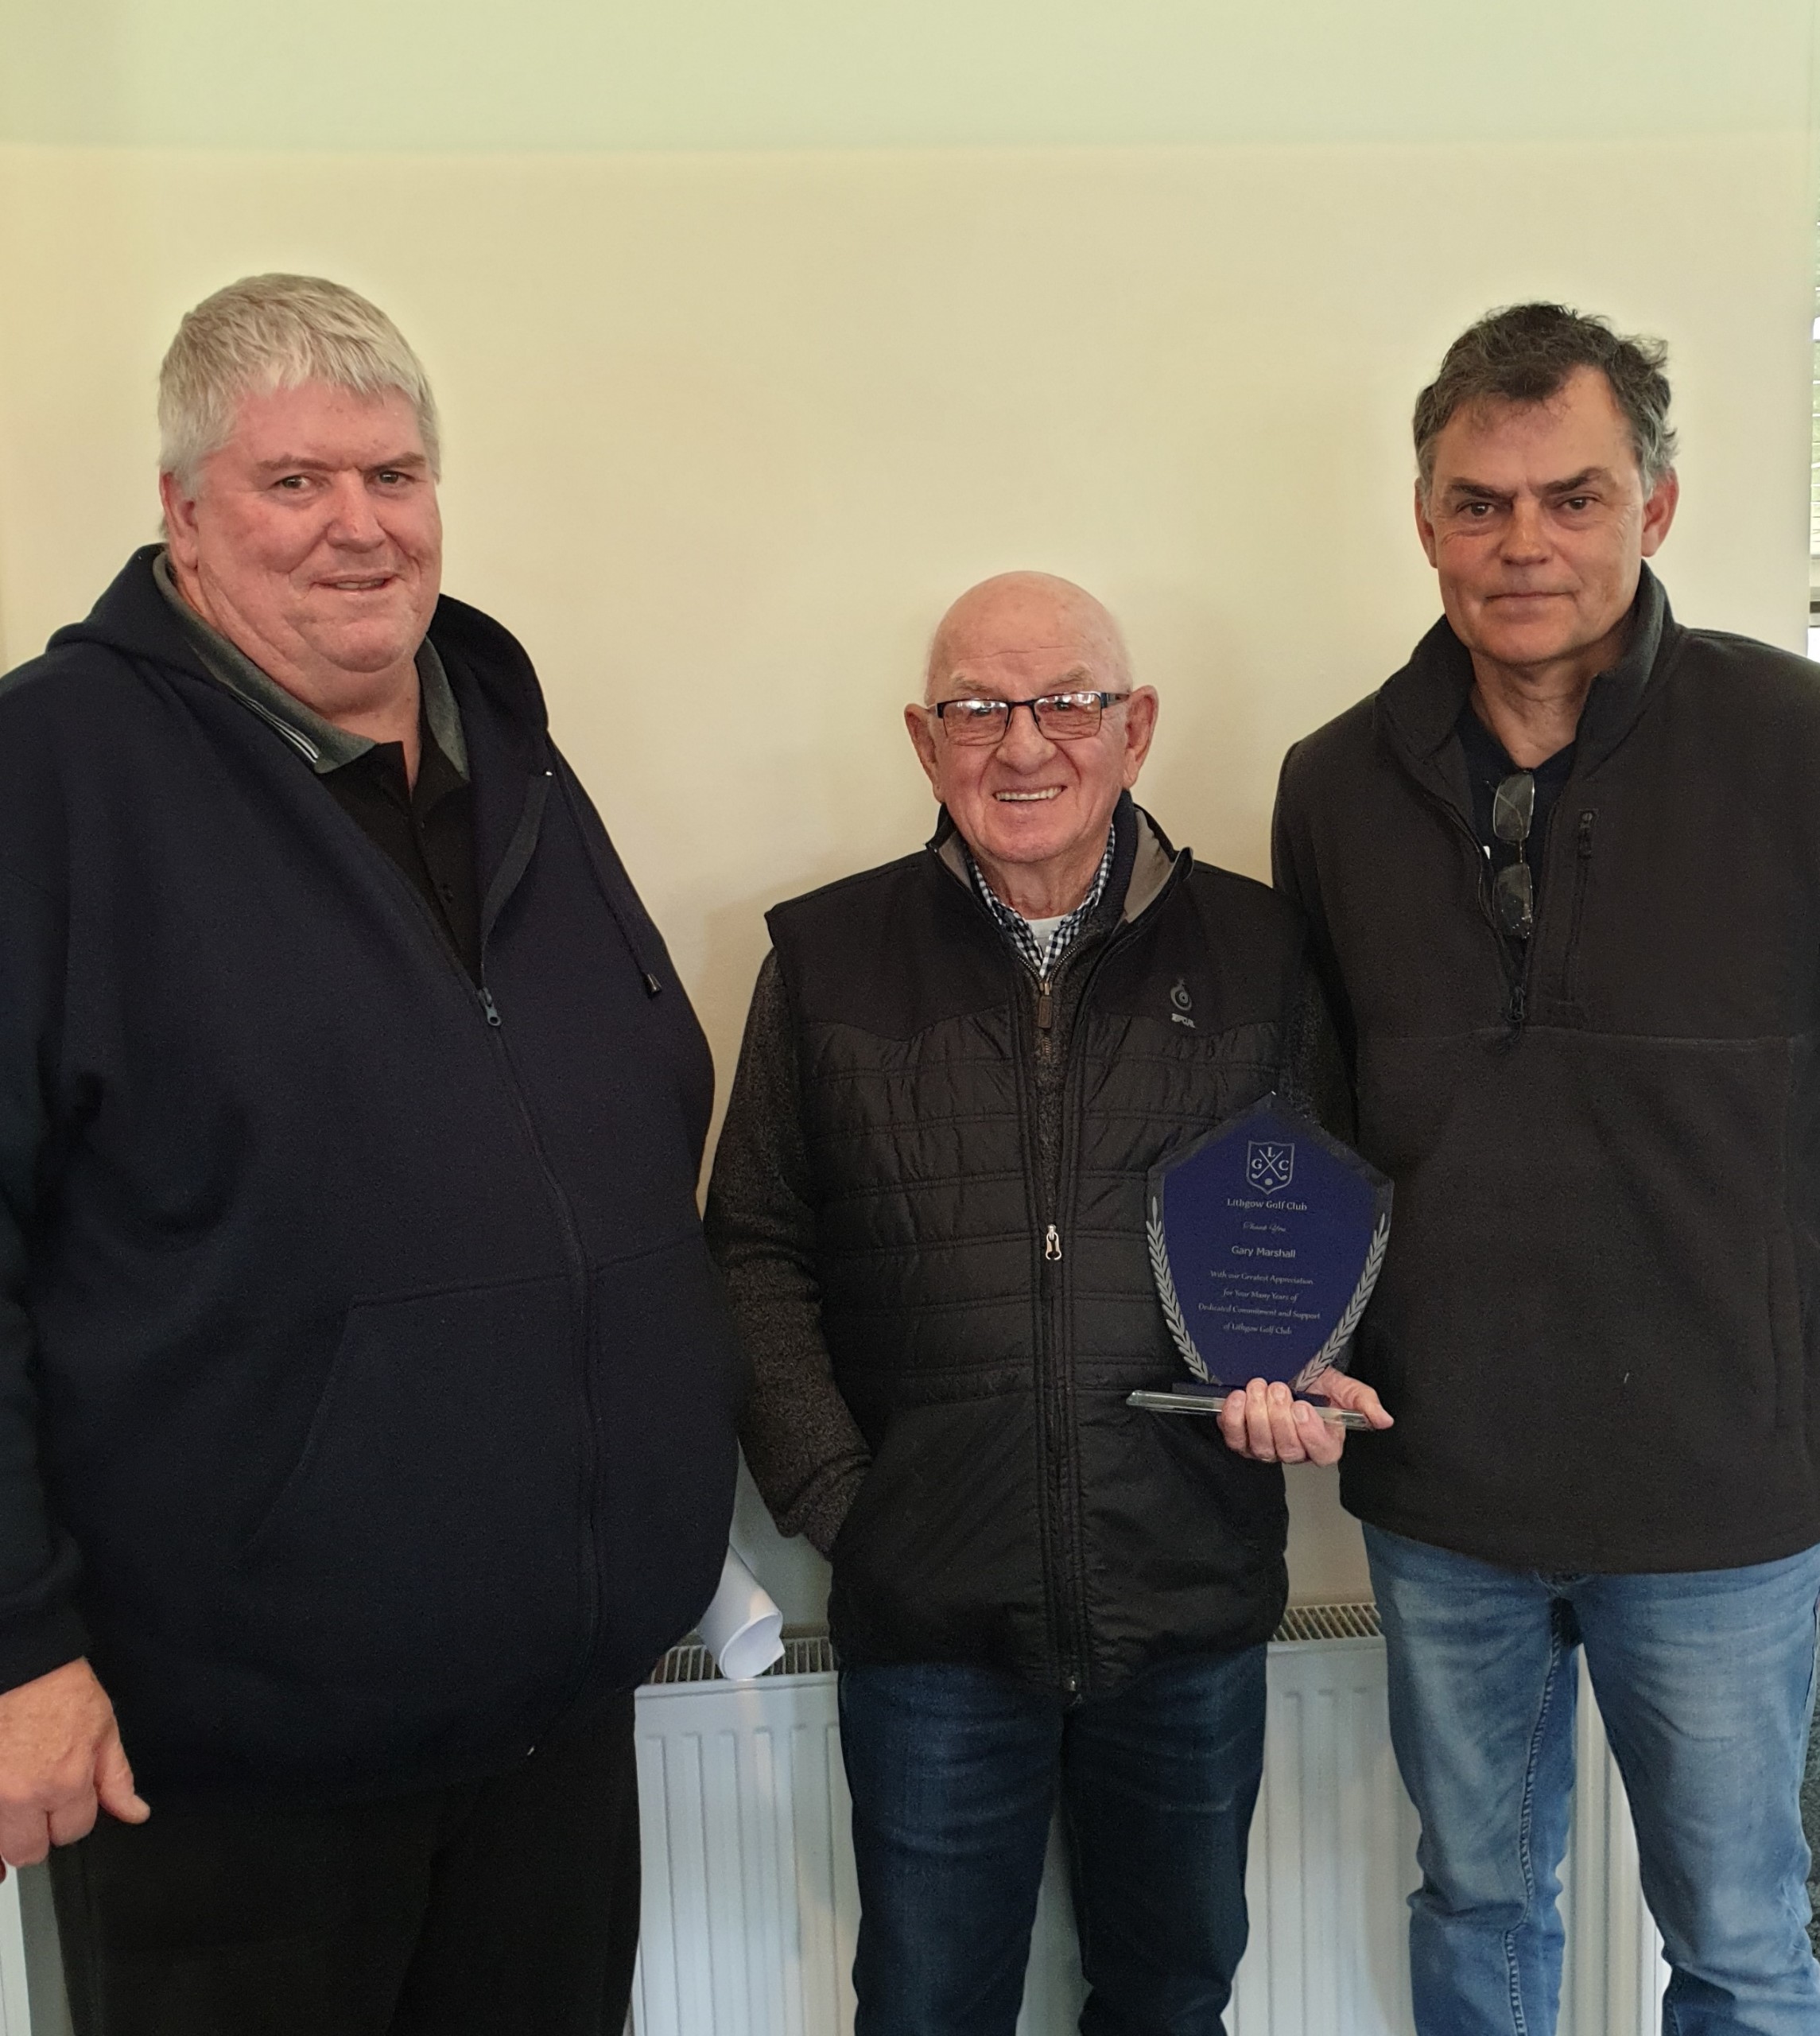 Life Membership awarded to Max Nightingale & Gary Marshall at the Annual General Meeting.